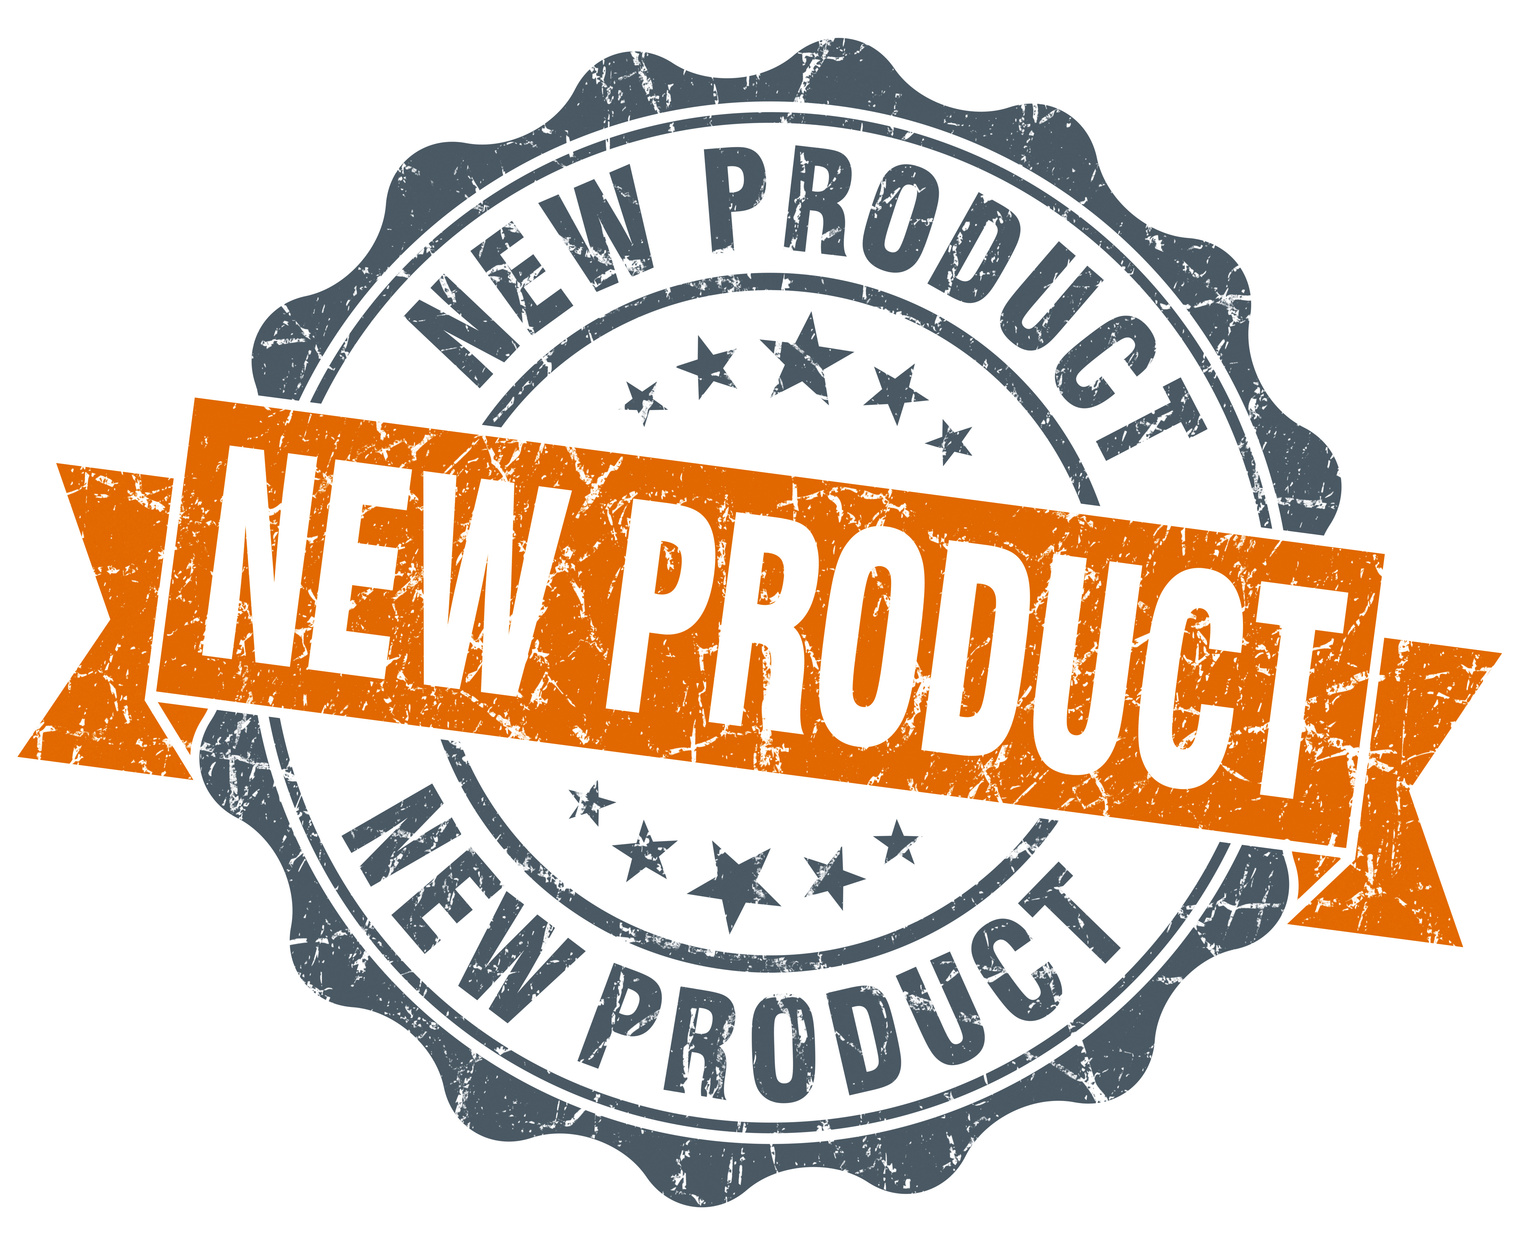 Significant New Products for 2015